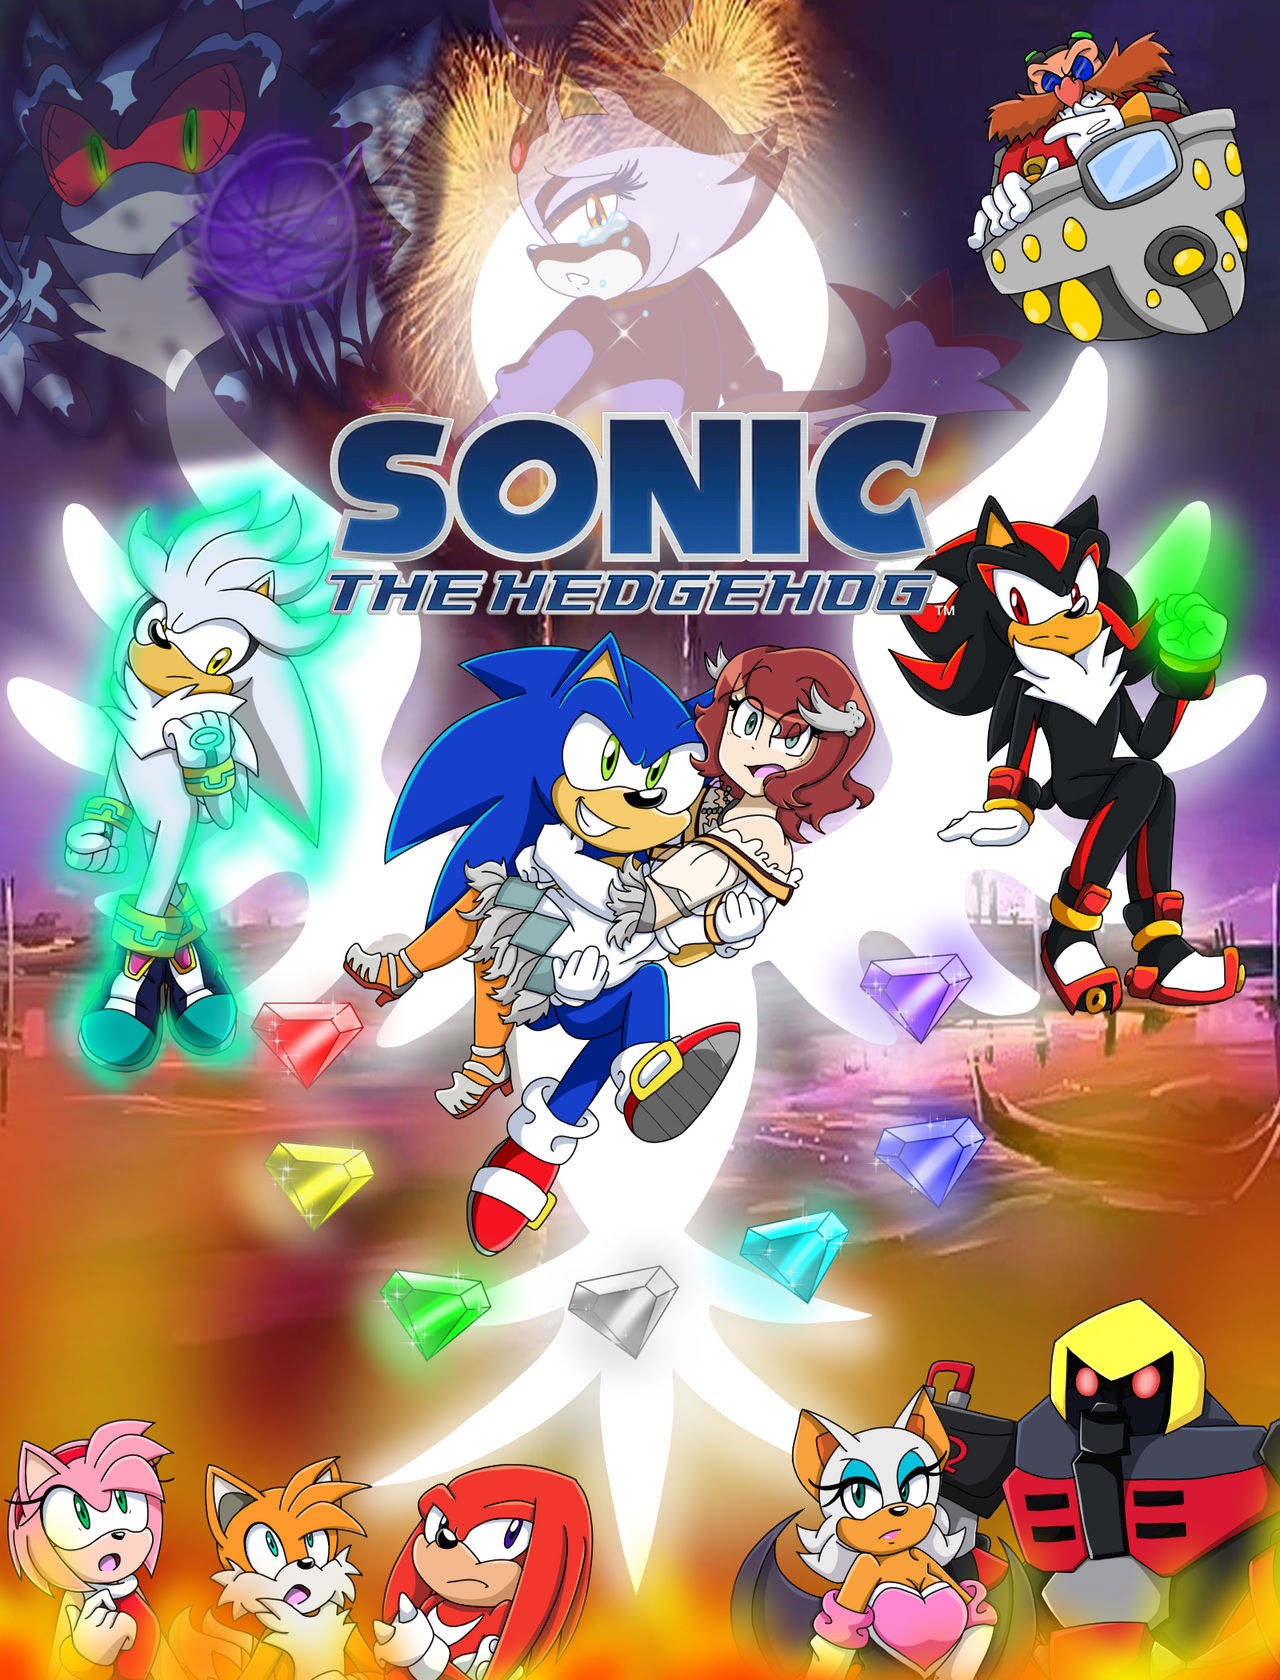 Sonic the Hedgehog 2006 Remake by AwesomeIsaiah on DeviantArt